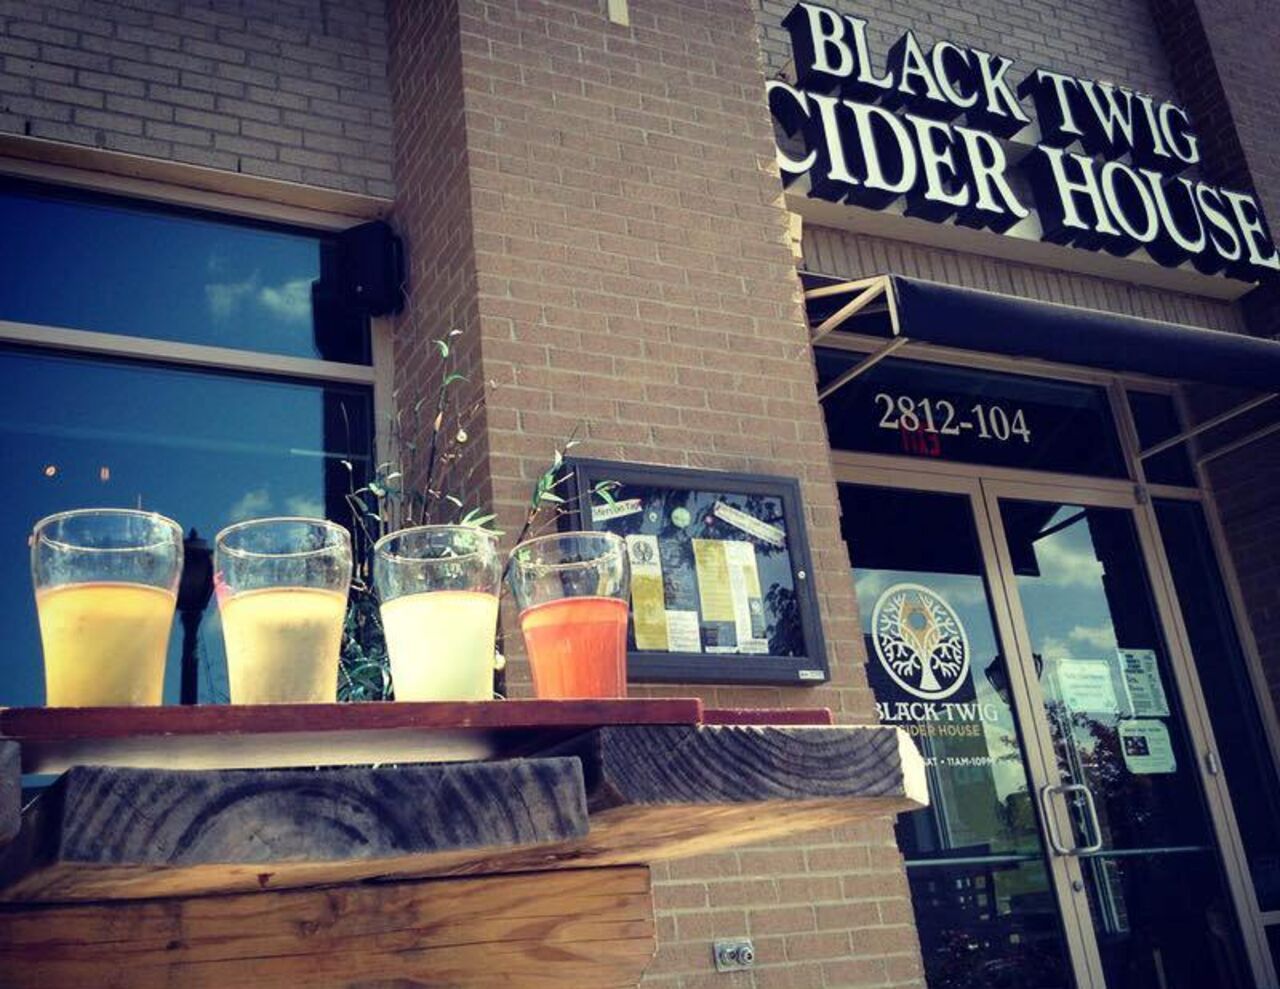 A photo of Black Twig Cider House